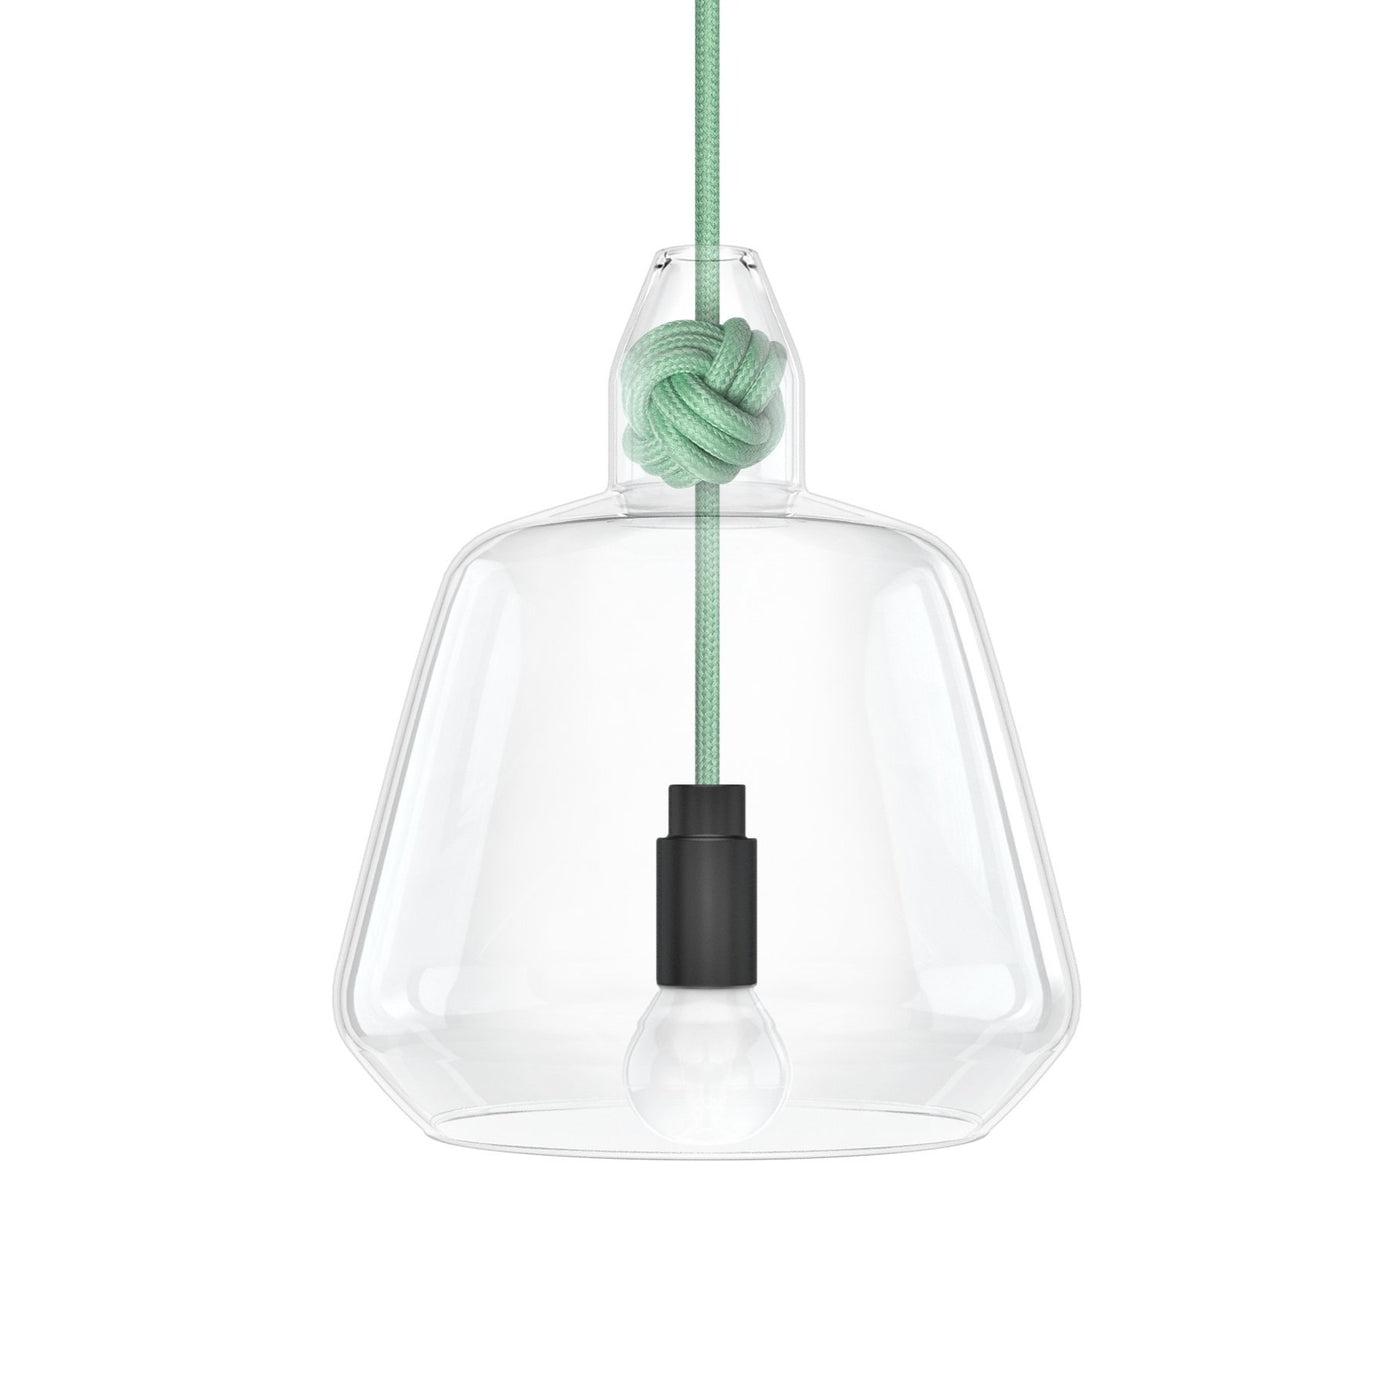 Knot Lamp is made from handblown glass with two shade designs, both supported by a monkey fist knot in a choice of 6 colours.  Pictured here with mint fabric cord.  Beautiful, simple and versatile lighting.